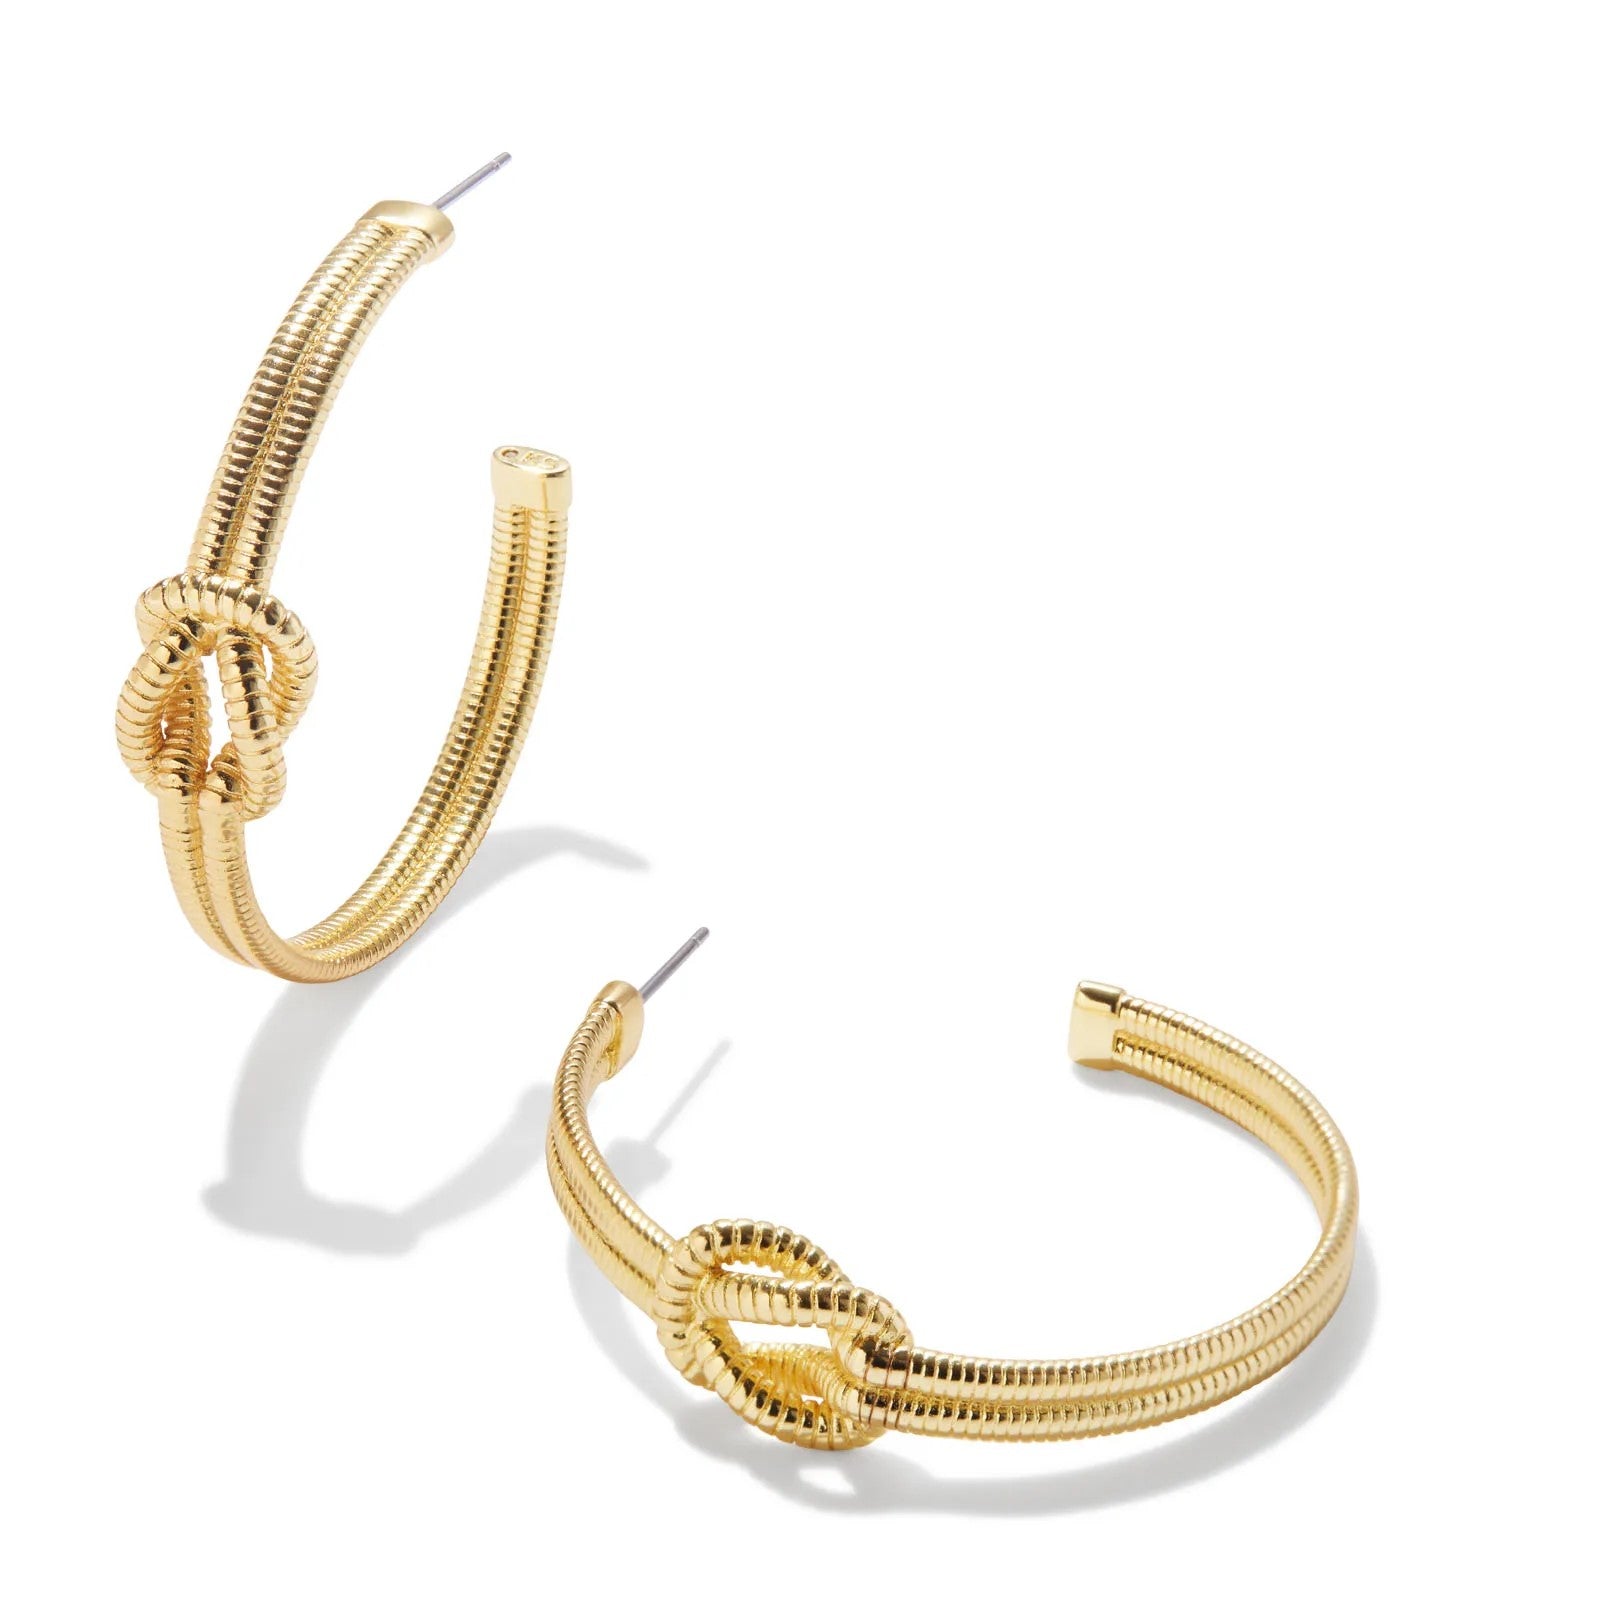 Kendra Scott | Annie Hoop Earrings in Gold - Giddy Up Glamour Boutique